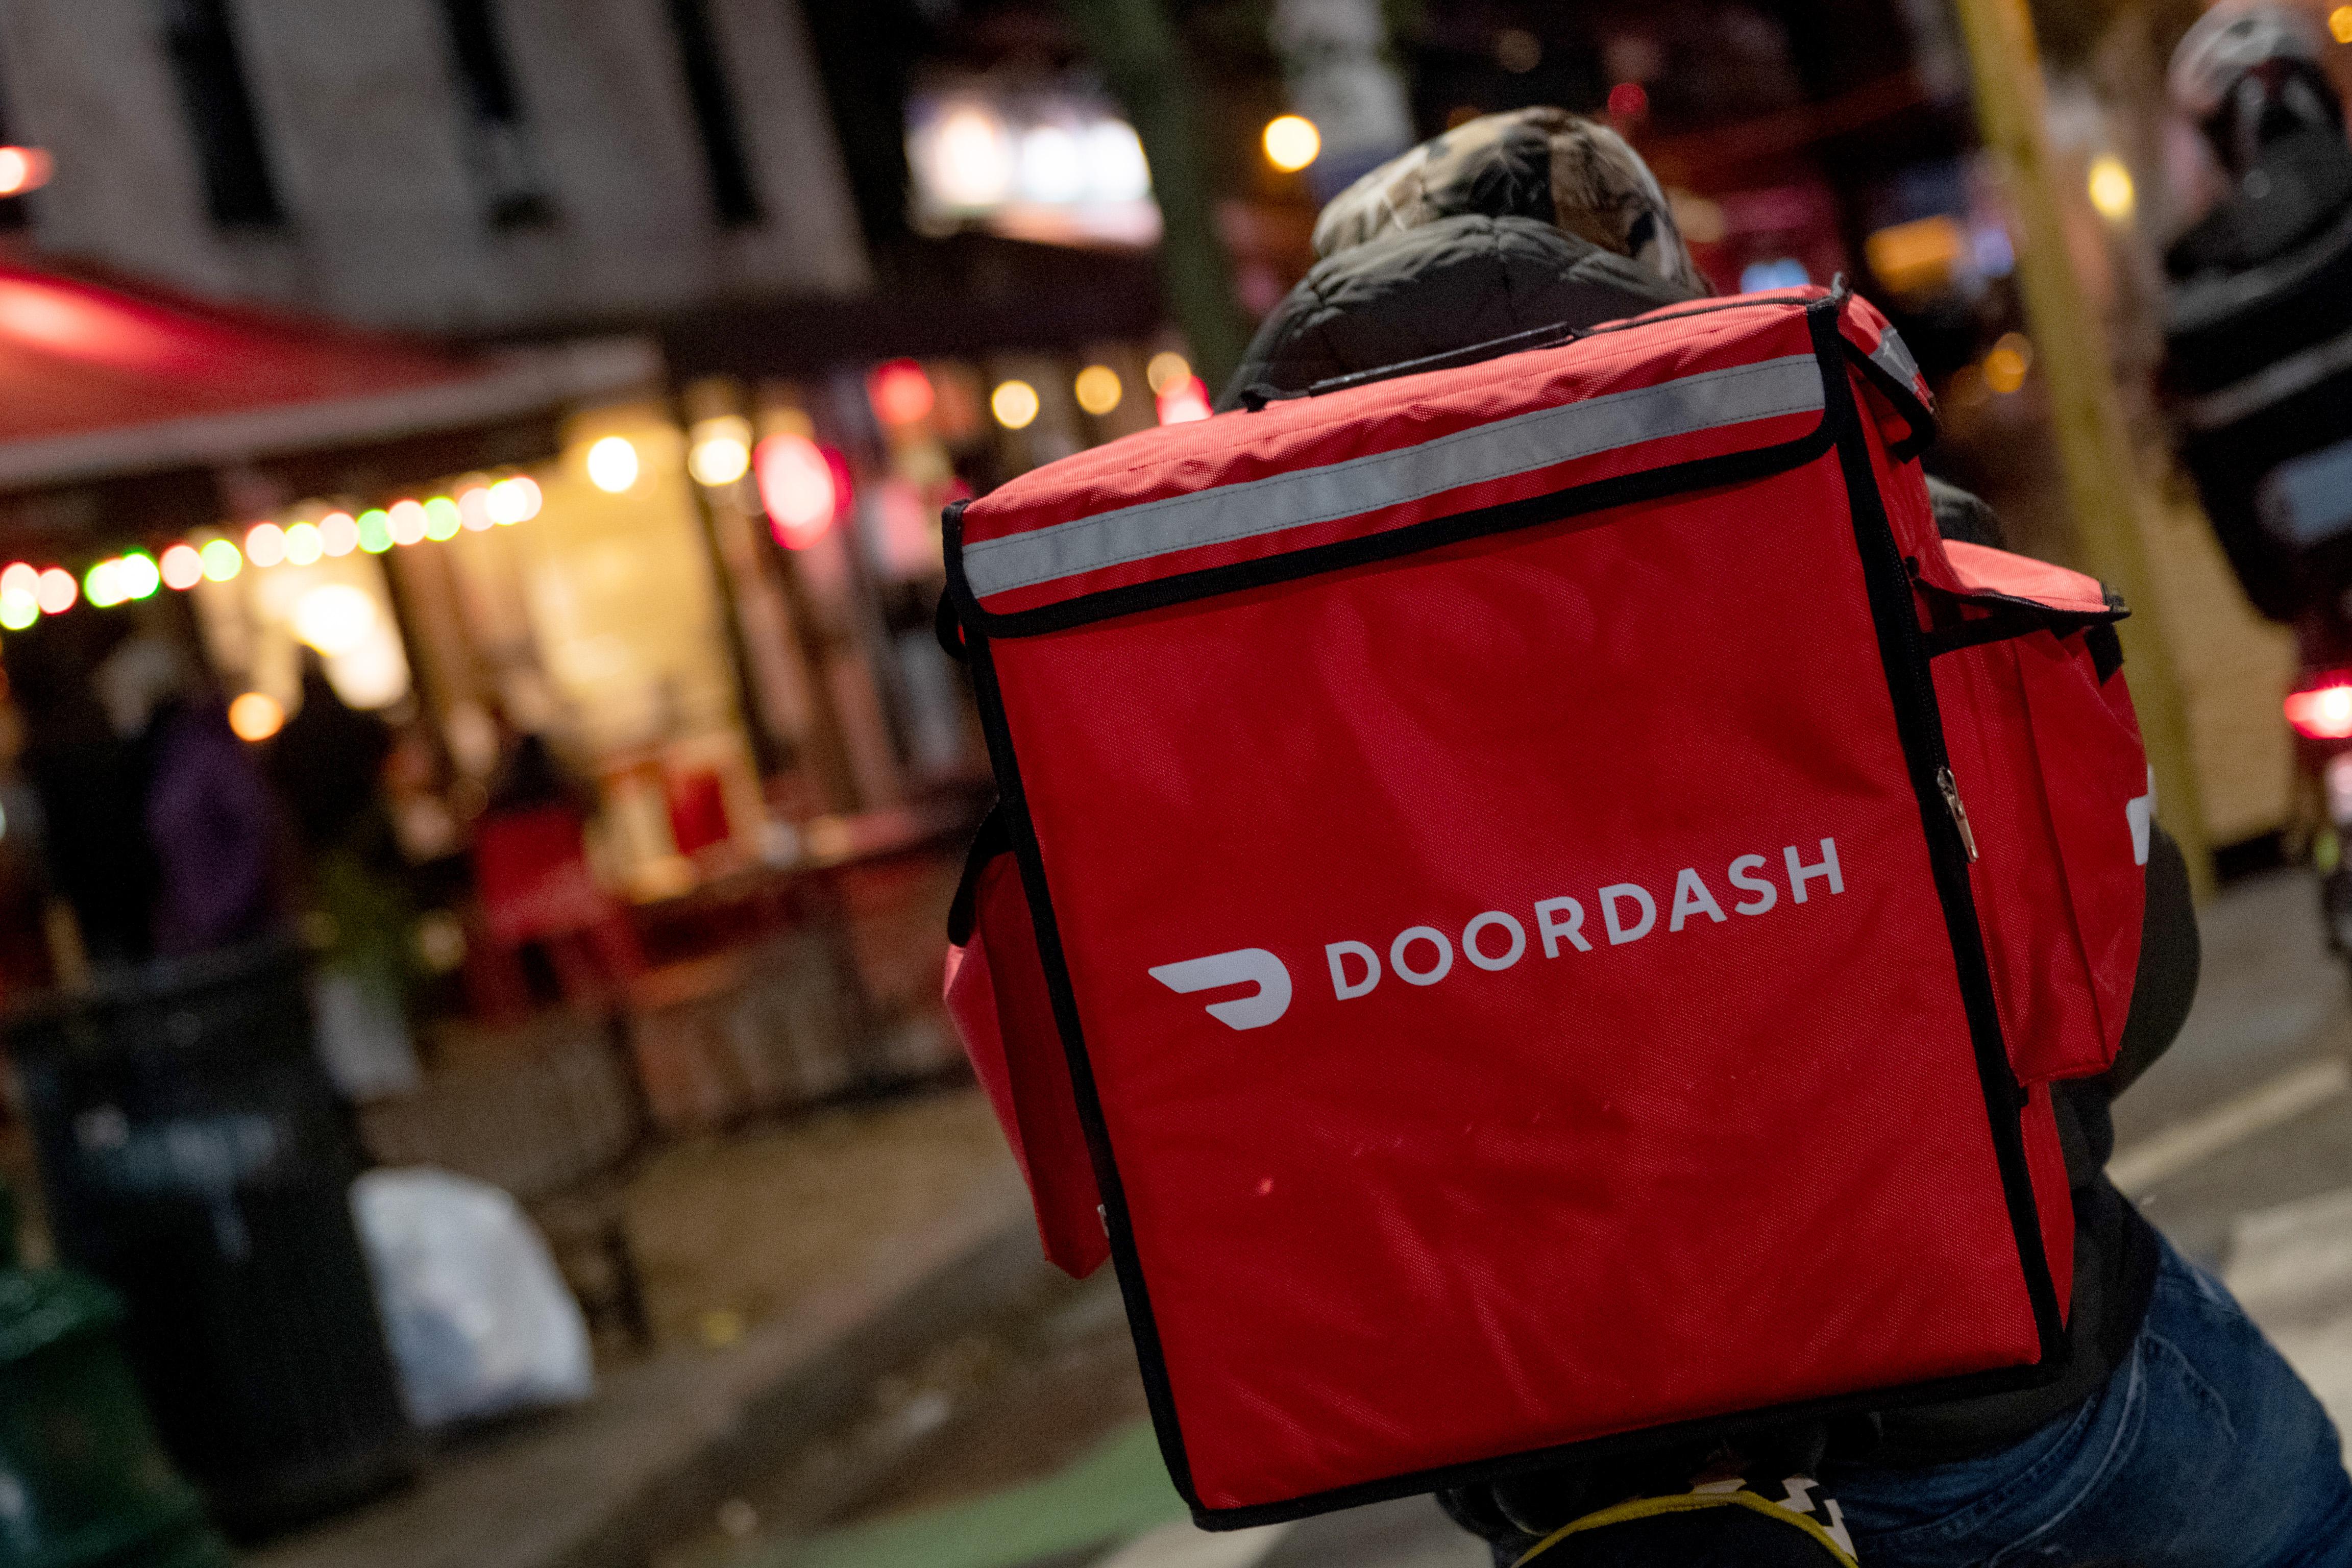 DoorDash 15-minute delivery starts with employees - Protocol